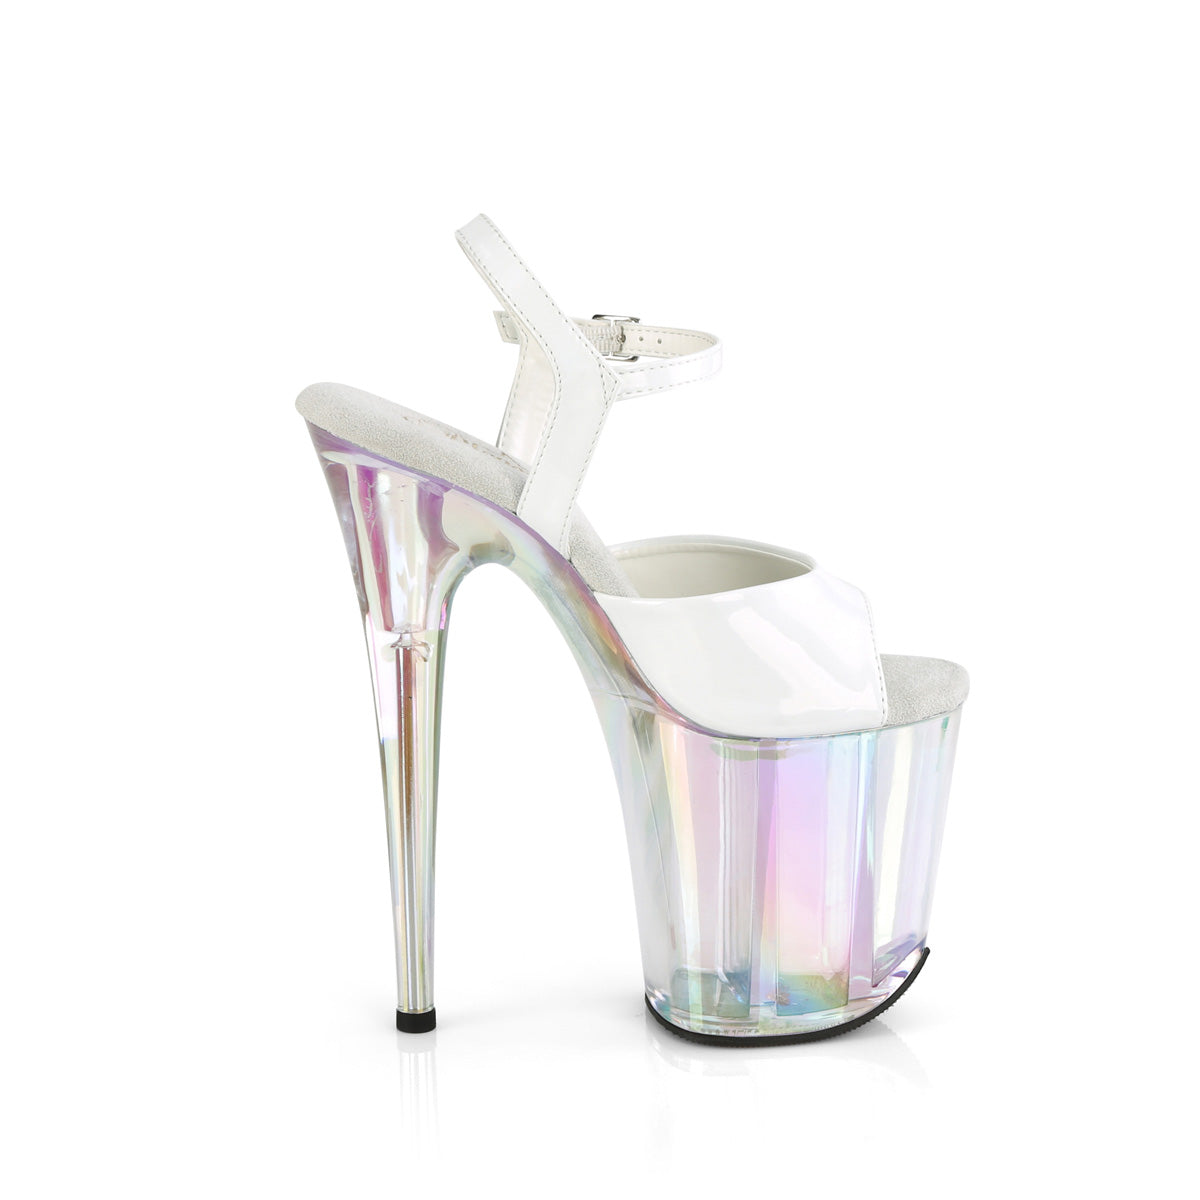 FLAMINGO-809HT Pleaser White Holo Patent/Holo Tinted Platform Shoes [Exotic Dancing Shoes]